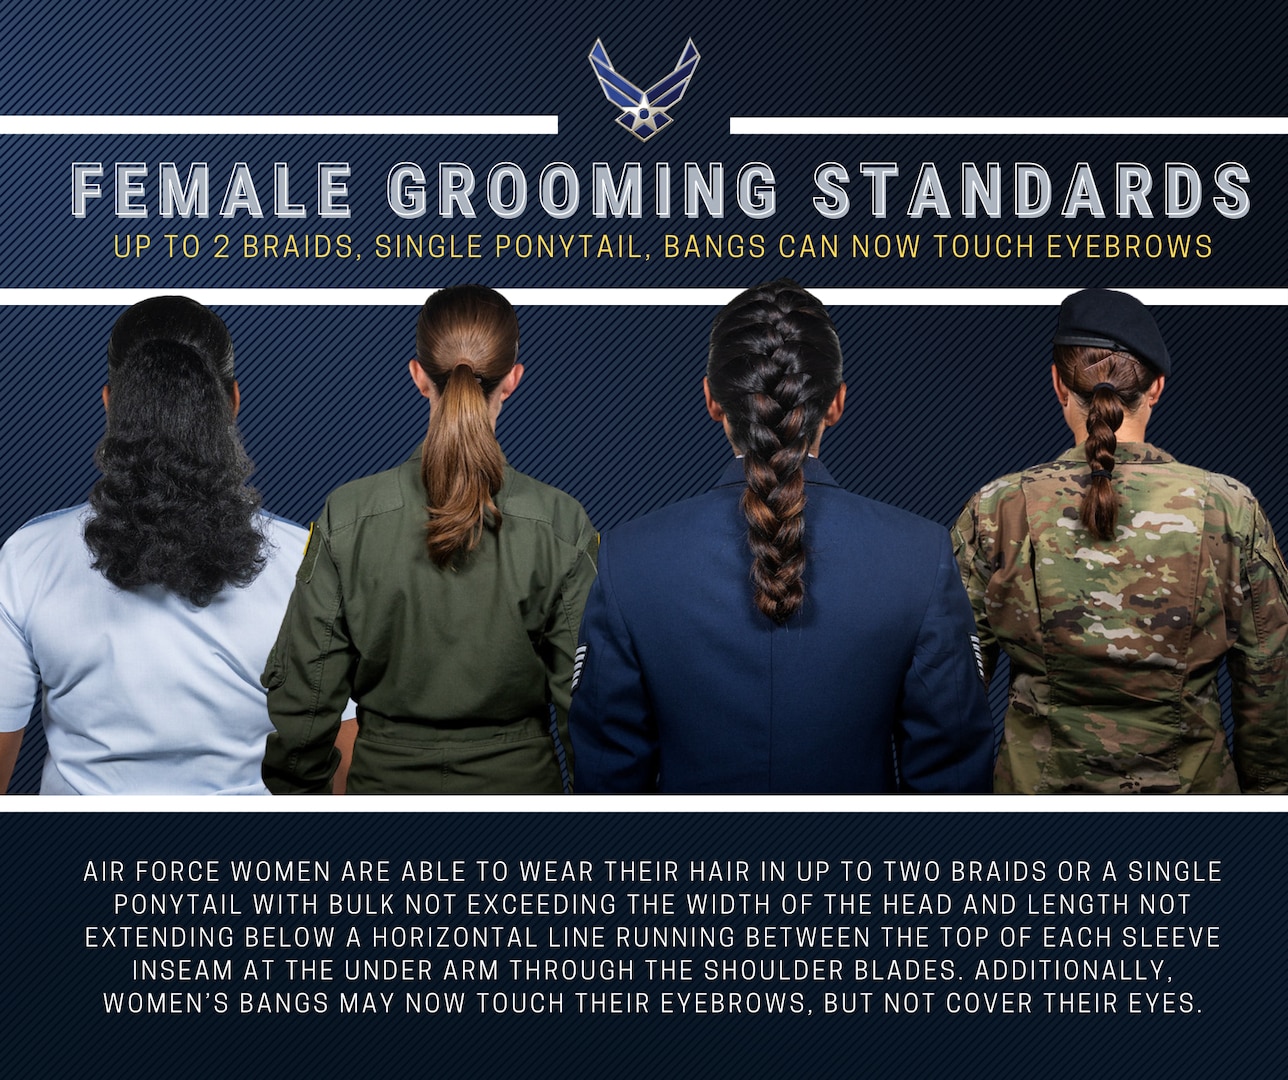 New hairstyle options now available for female Airmen > Joint Base San